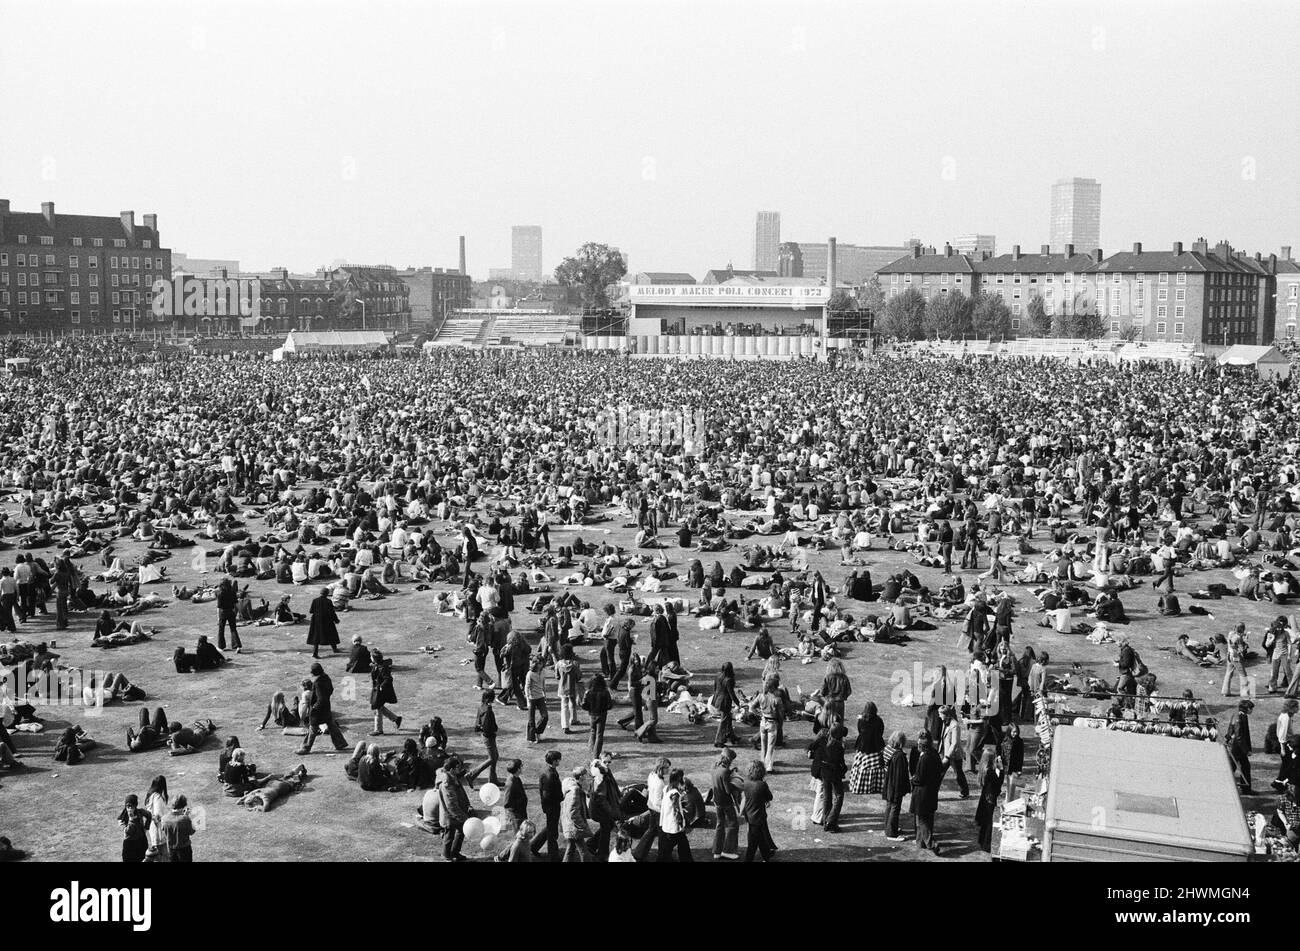 A huge crowd enjoys The Oval Pop Festival, Oval Cricket Ground, South London, in the late summer of 1972 On the day, Rod Stewart won Best Male Vocalist 1972, Emerson Lake and Palmer won 7 awards, Maggie Bell and Brian Eno won awards too.  The festival was sponsored by Music Magazine Melody Maker  Picture taken 30th September 1972 Stock Photo